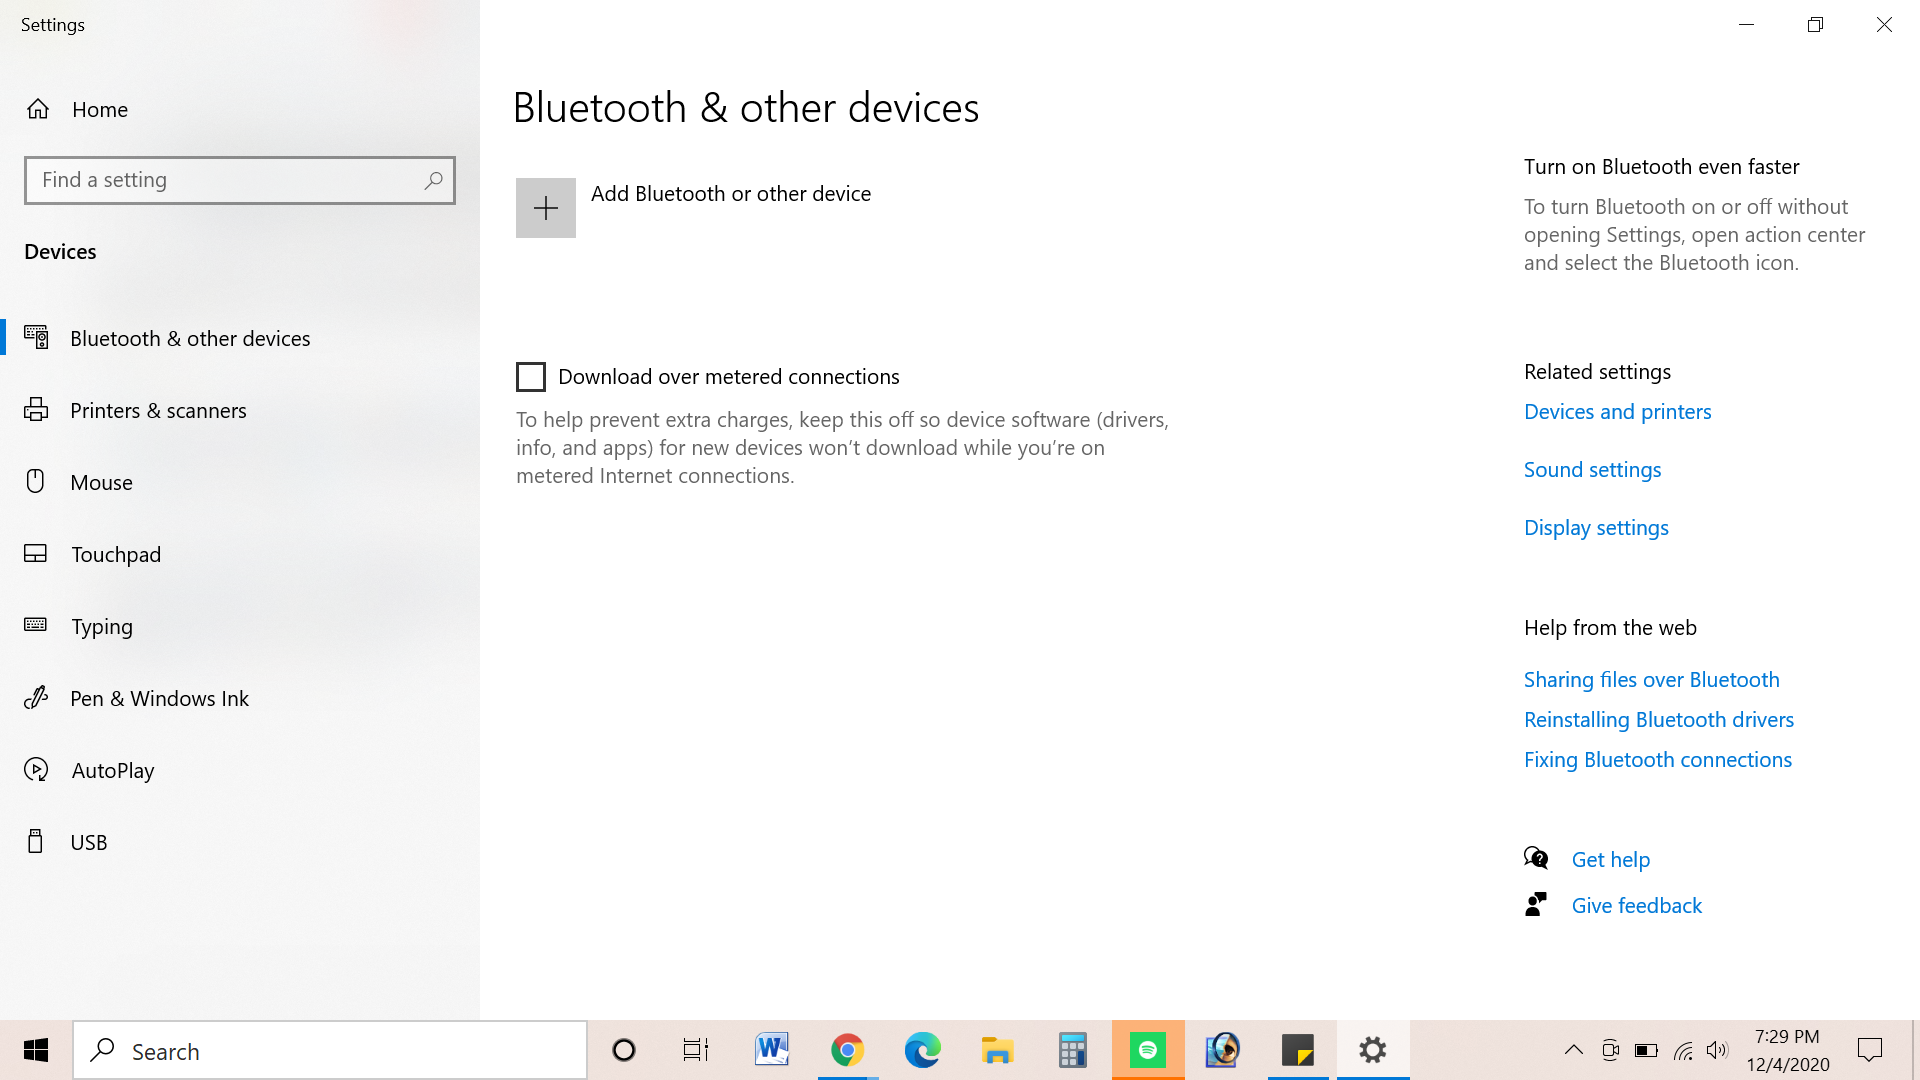 Bluetooth uninstalled from device manager 68351e90-9f9d-4099-89c8-e65a47b019dd?upload=true.png